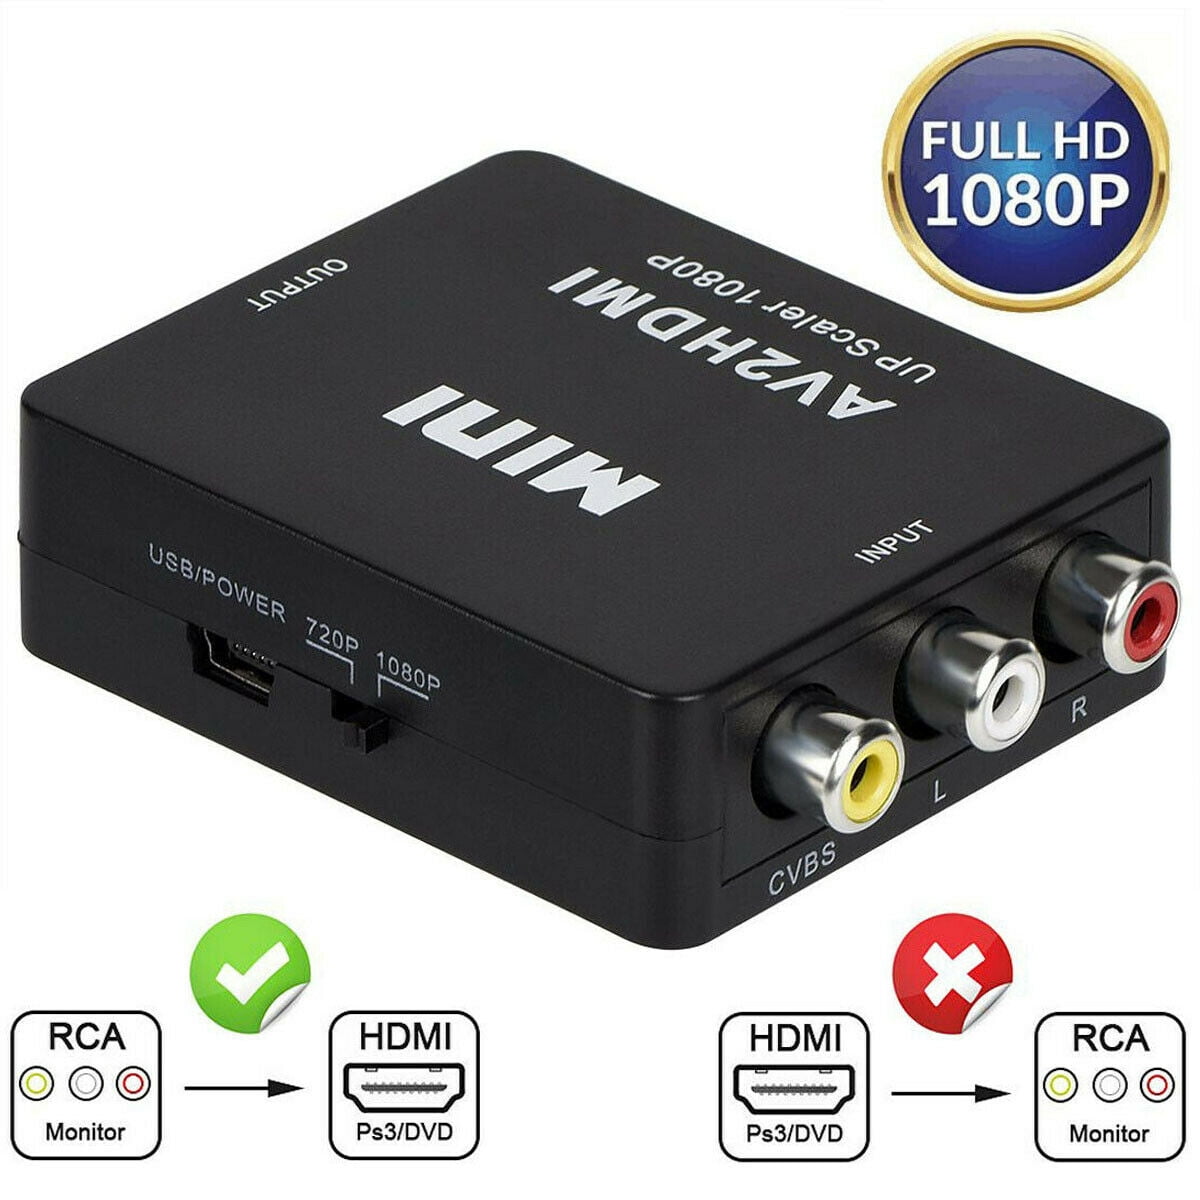 Ældre borgere nedadgående underordnet RCA to HDMI converter 1080P Mini RCA Composite CVBS AV to HDMI Video Audio  Converter Adapter Supporting PAL/NTSC with USB Charge Cable for PC Laptop  Xbox PS4 PS3 TV STB VHS VCR